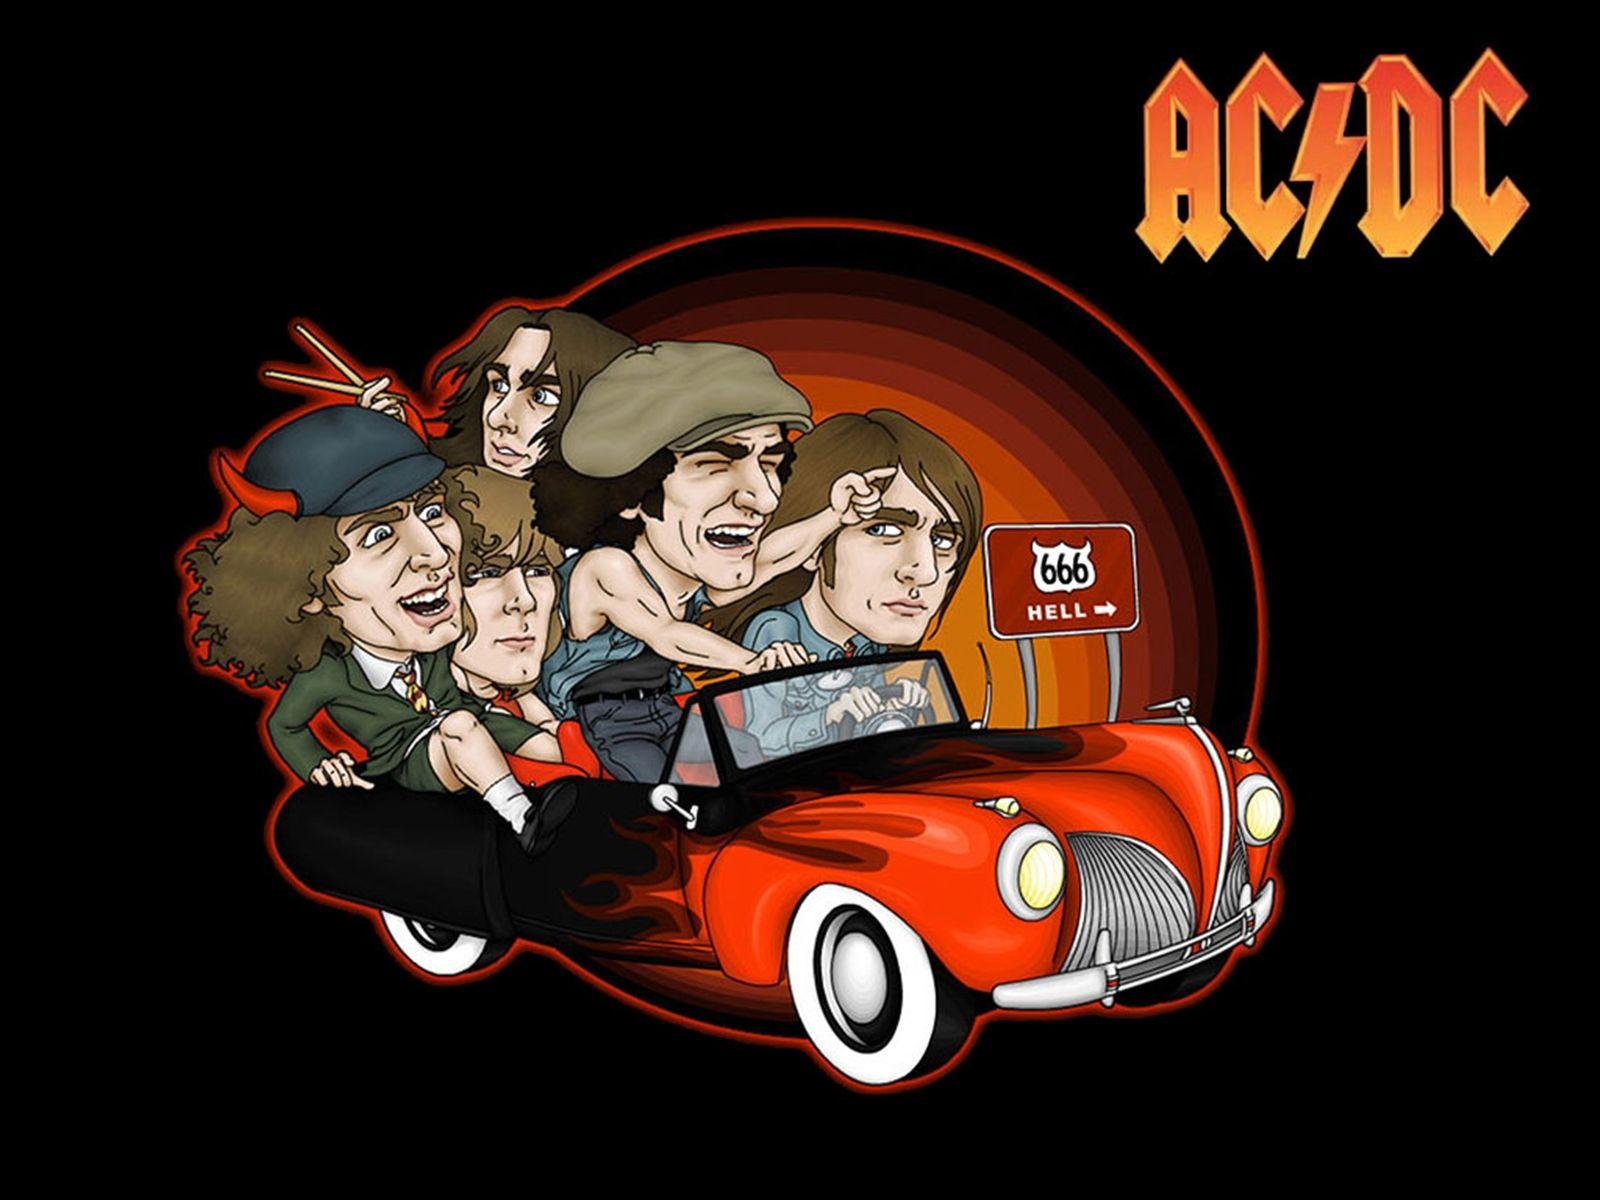 ACdcThe Best Band